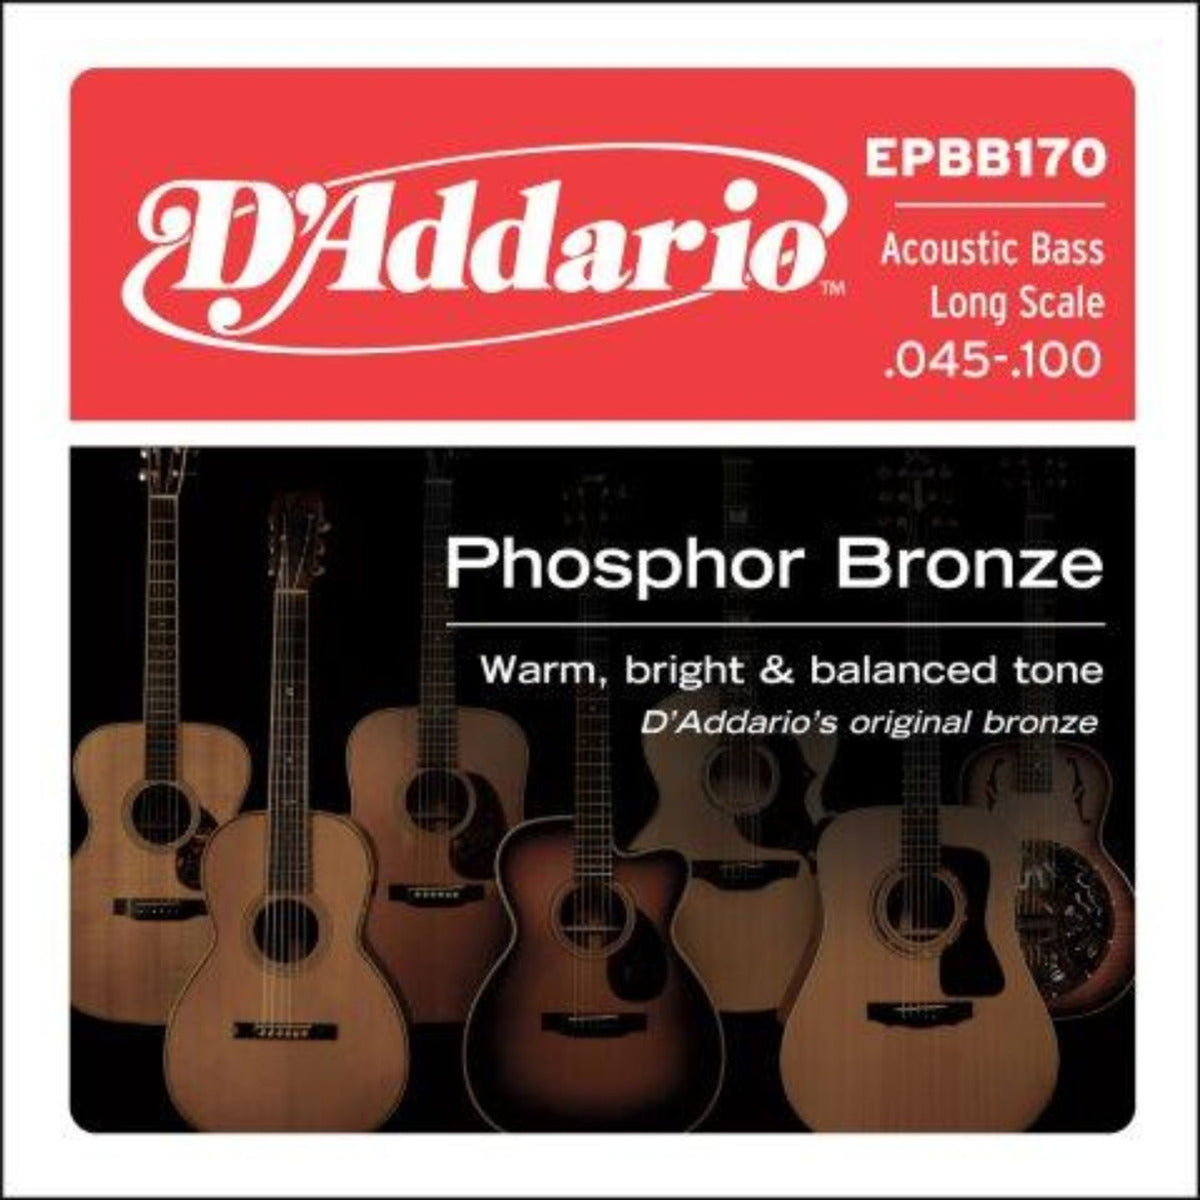 D&#39;Addario&#39;s most popular acoustic bass set, EPBB170 provides a rich, deep and projecting tone. Phosphor Bronze was introduced to string making by D&#39;Addario in 1974 and has become synonymous with warm, bright, and well balanced acoustic tone.